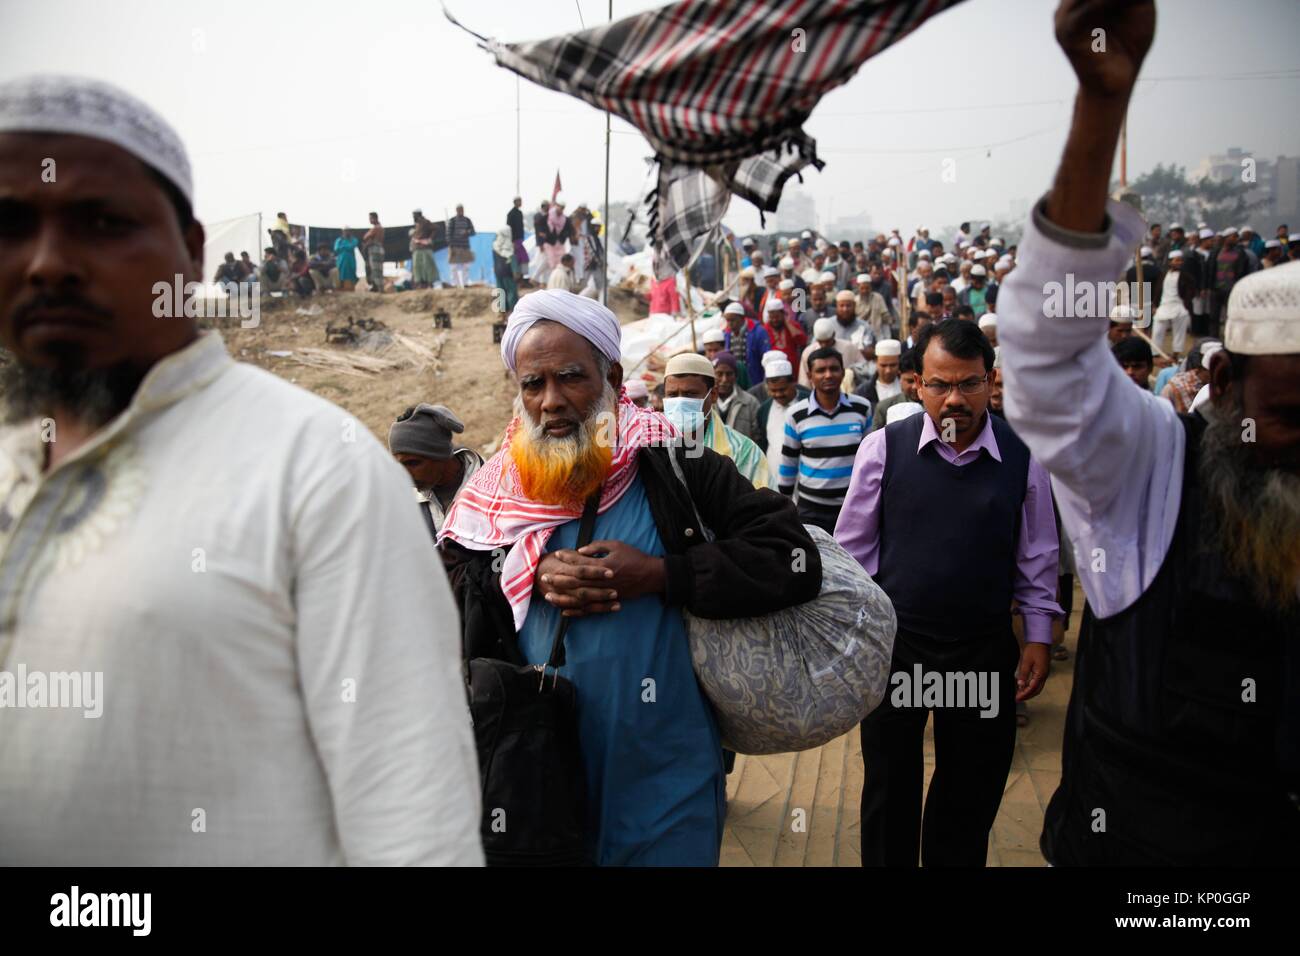 Muslim devotees attended Biswa Ijtema, at Tongi, on the outskirts of the Bangladesh capital Dhaka. Bishwa Ijtema means 'world congregation' and is Stock Photo